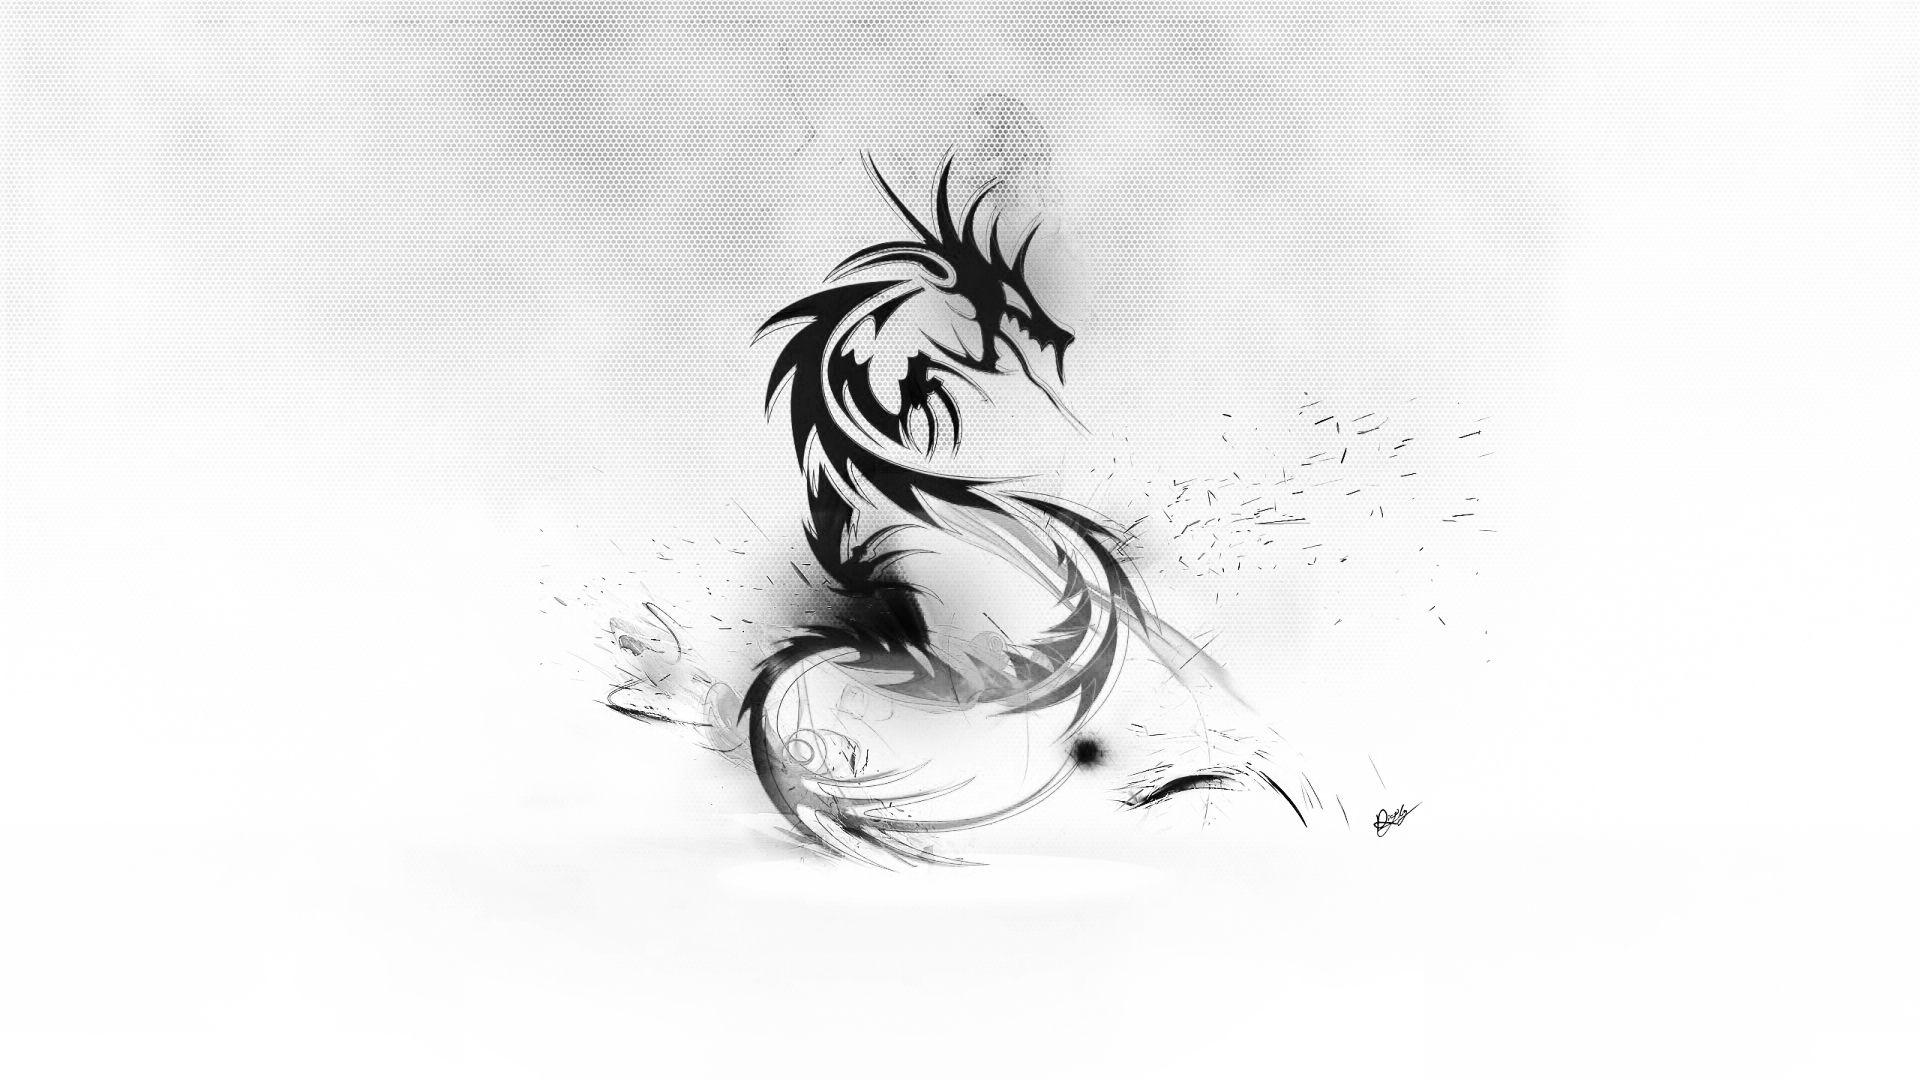 Black and White Dragon Gallery 569187330 Wallpaper for Free